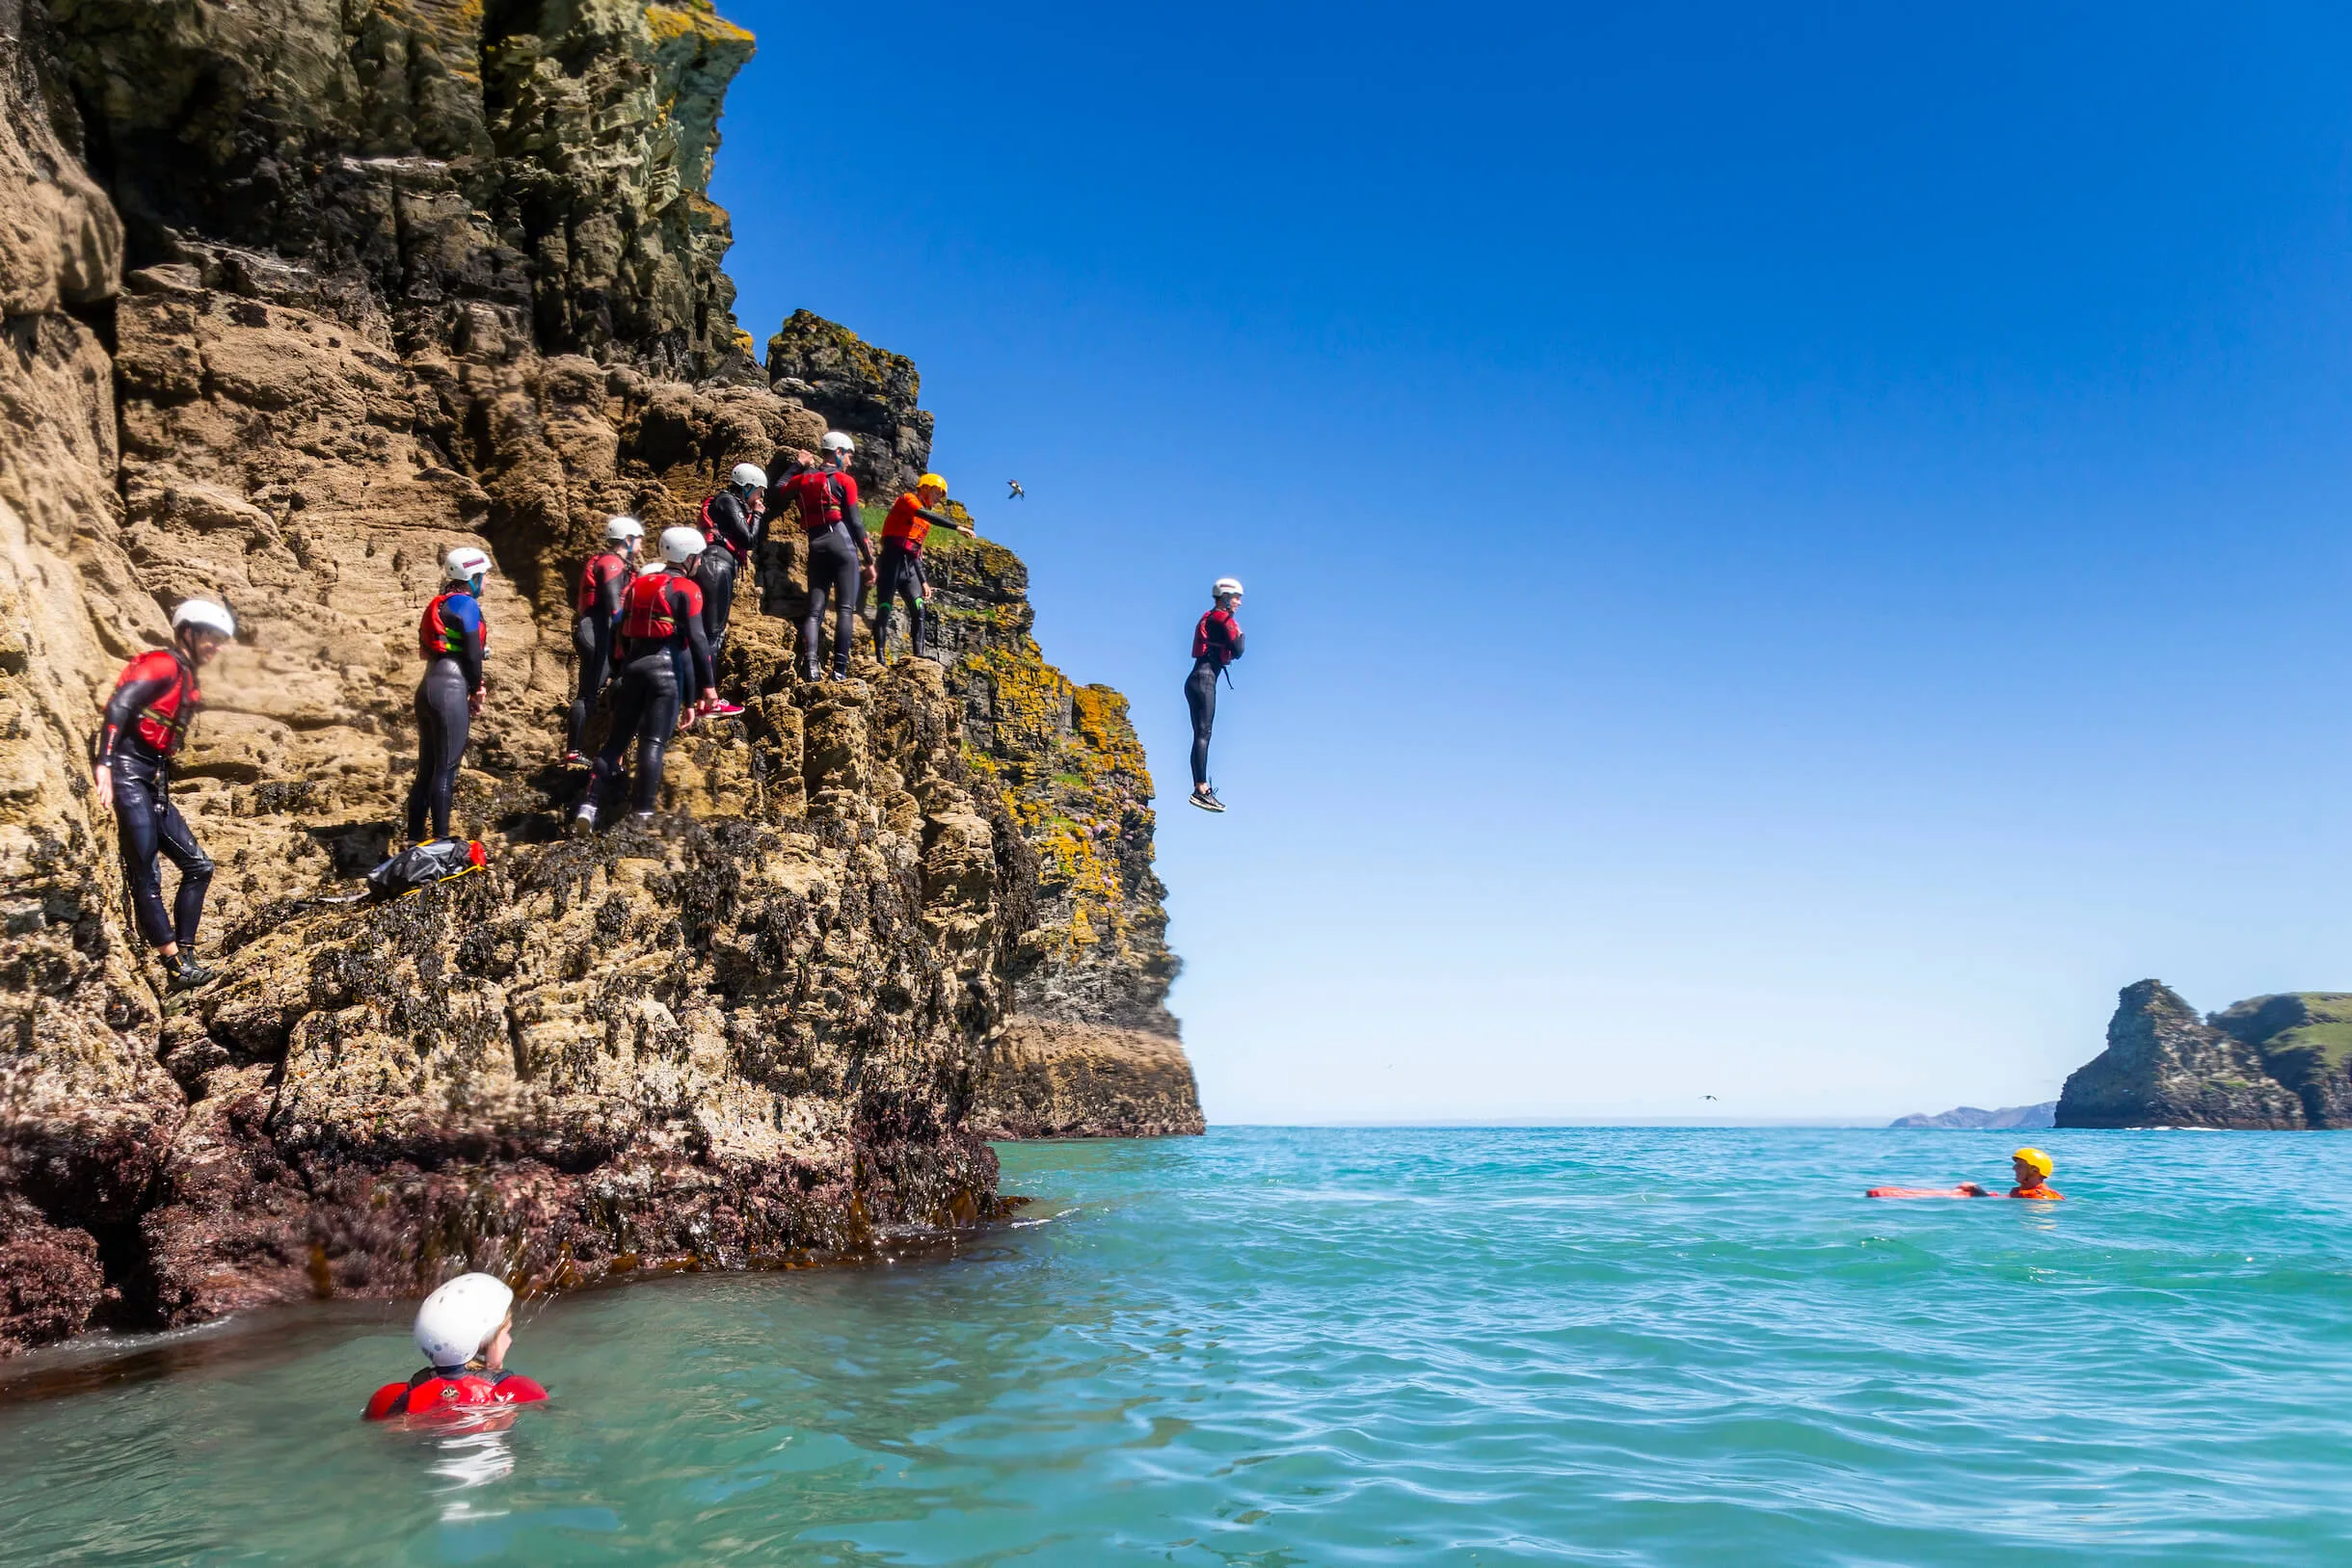 a group of people climbing and jumping safely off rocks while coasteering with two coasteer guides watching